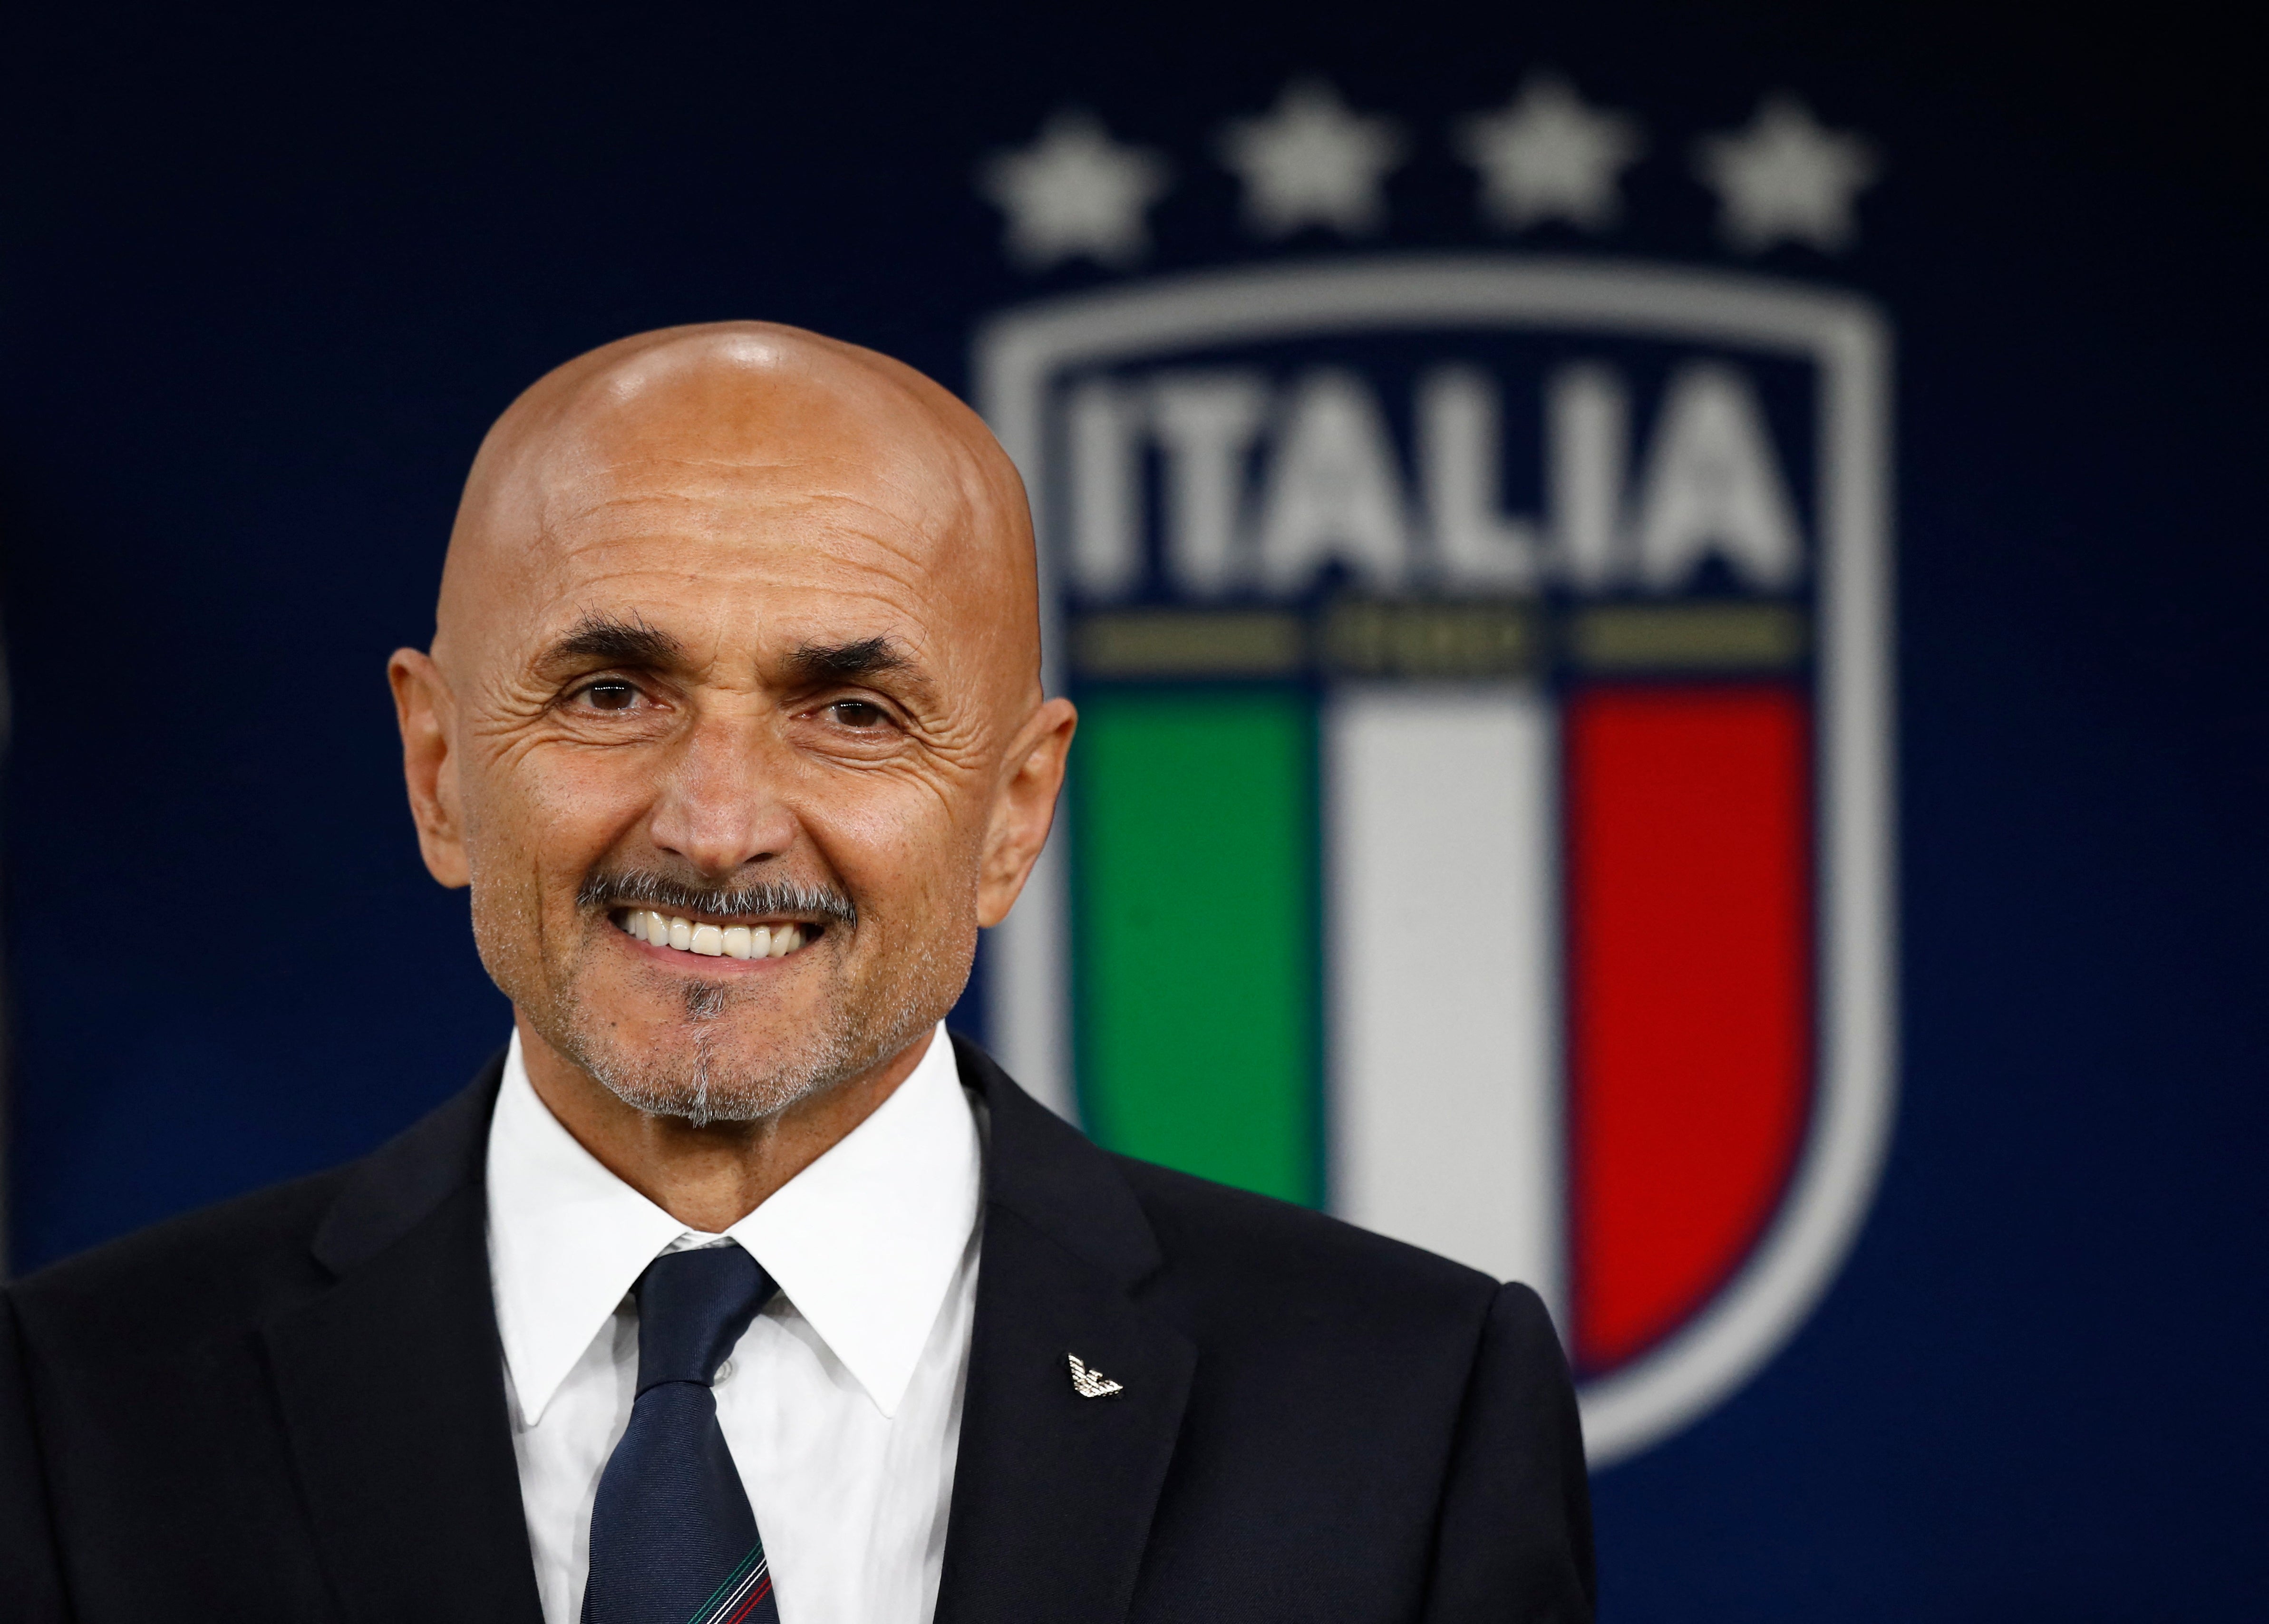 A wizened, gnomic figure, Spalletti is scarcely the stereotype of an Italian manager